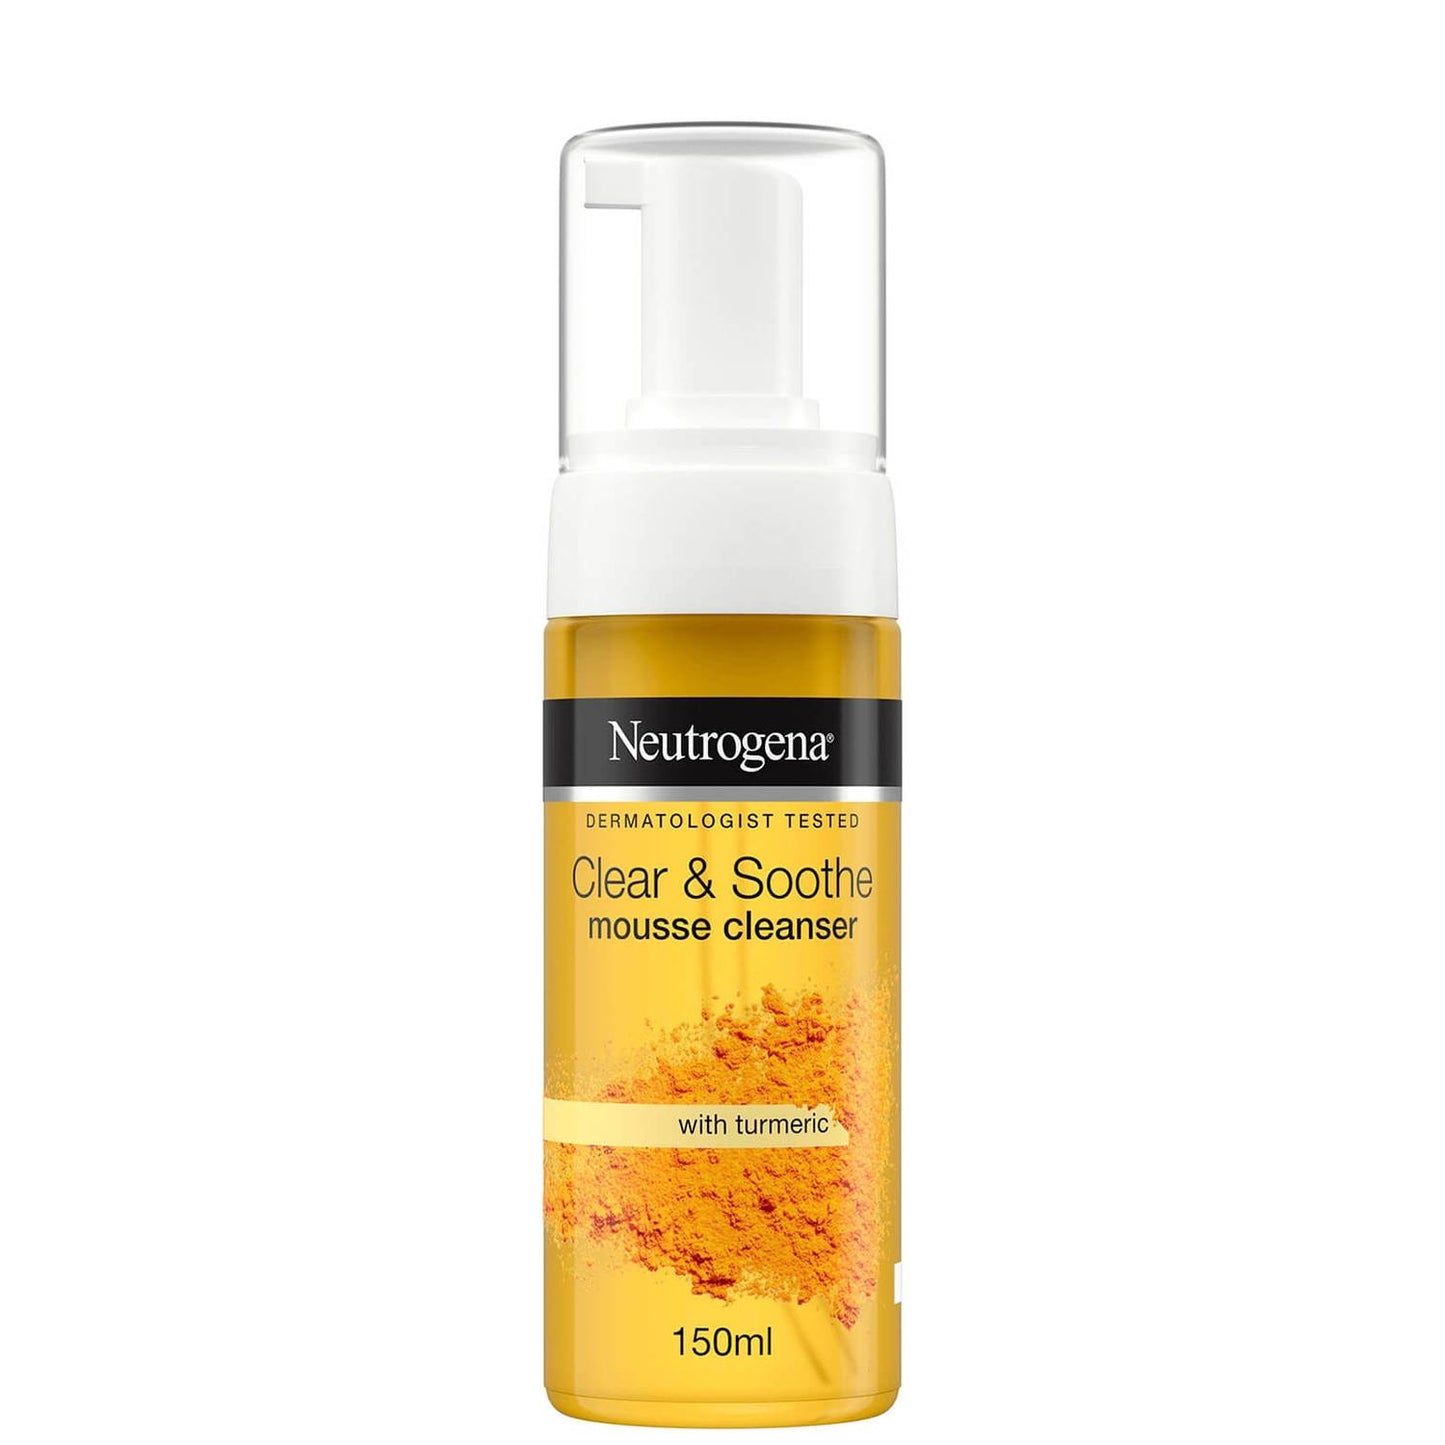 Neutrogena Clear and Soothe Mousee Cleanser